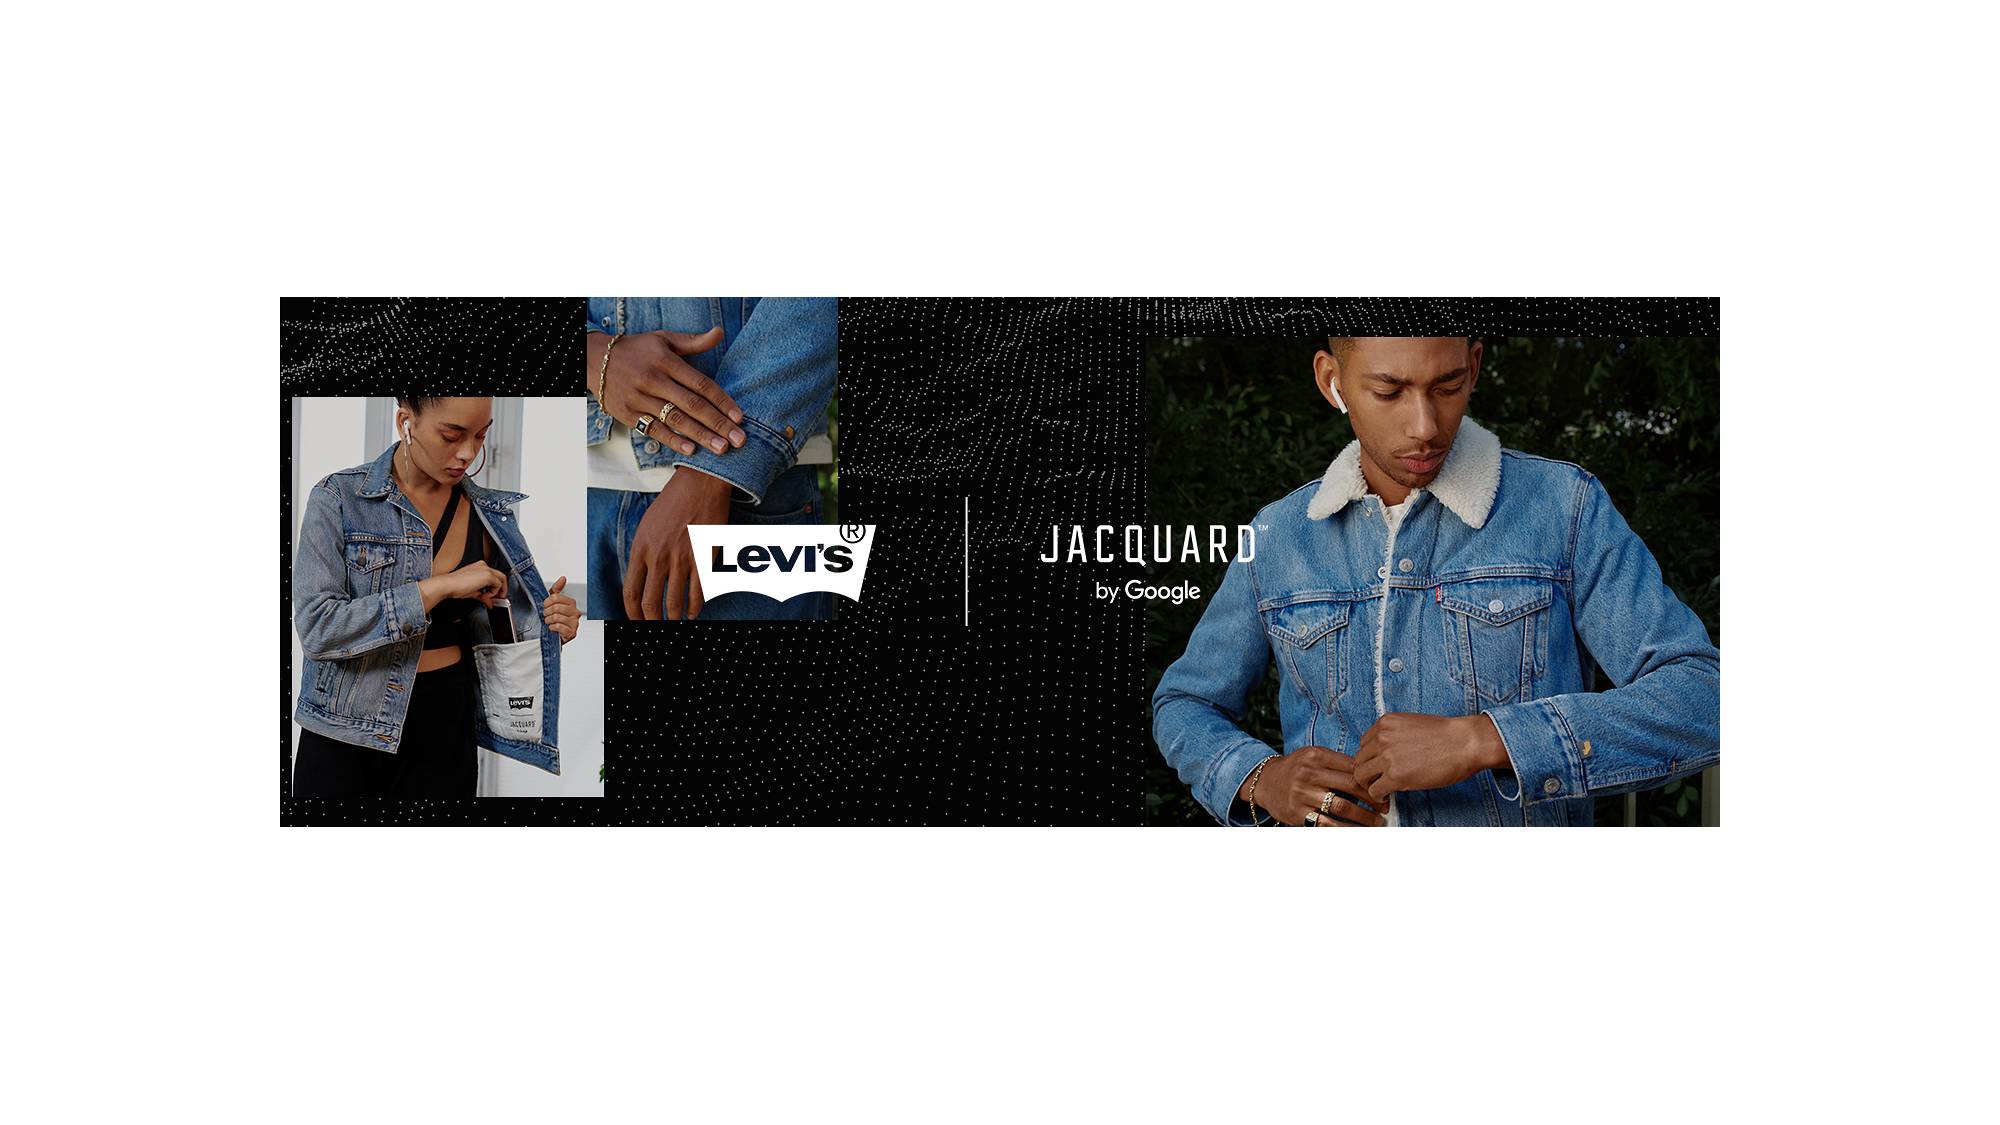 LEVI'S® TRUCKER JACKET WITH JACQUARD™ BY GOOGLE | Off the Cuff